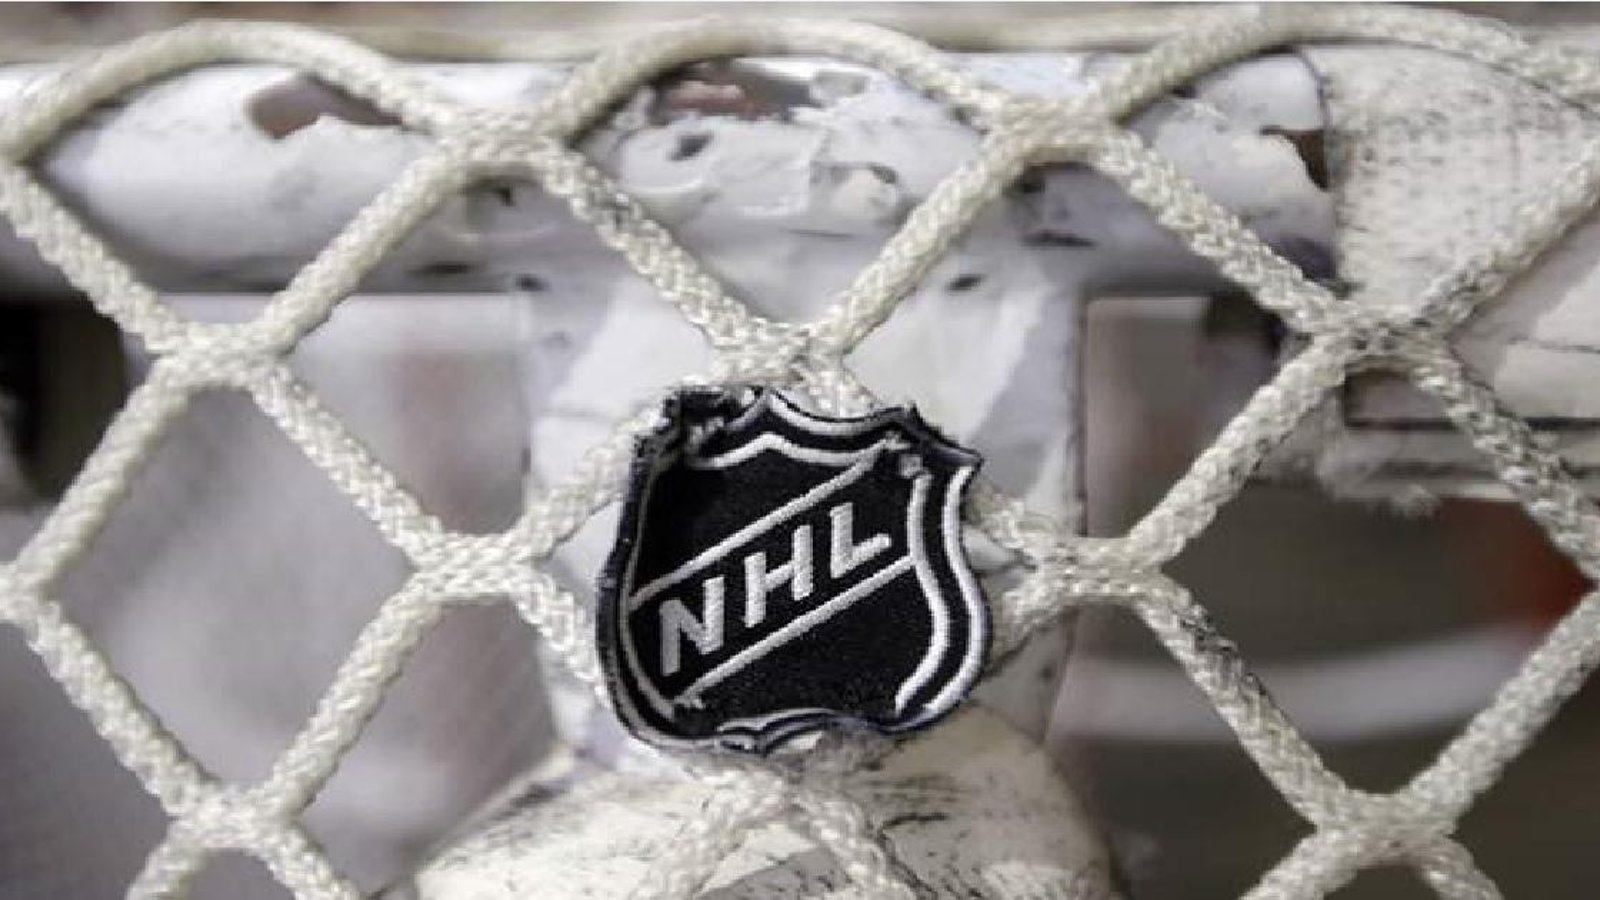 Two NHL teams have made offers to player banned for performance enhancing drugs.